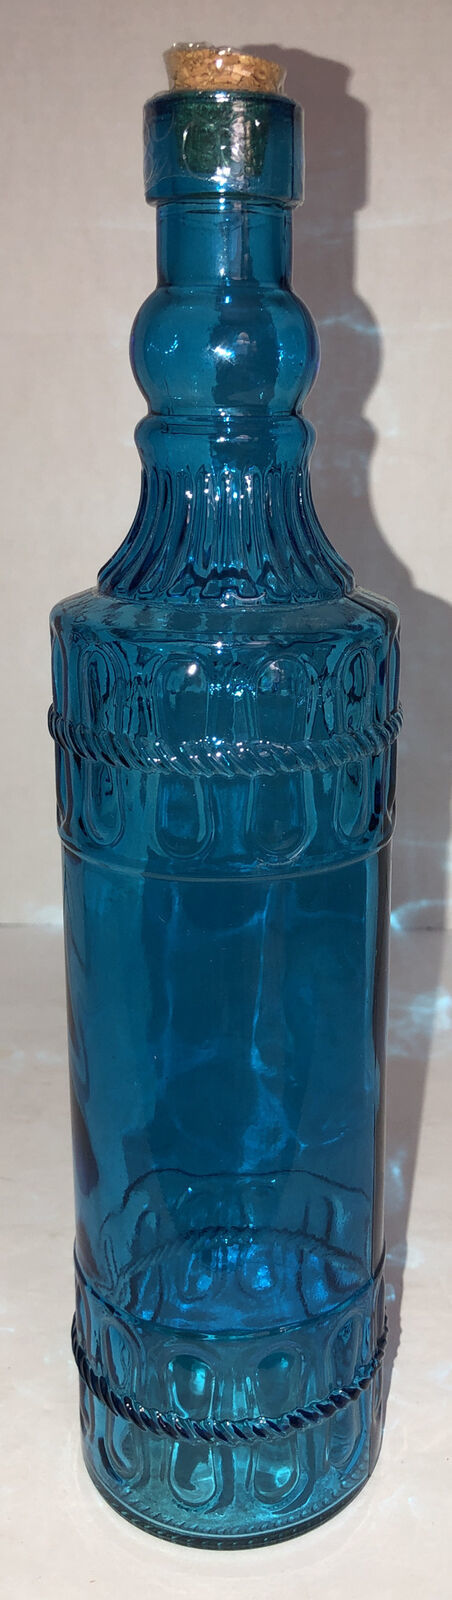 Primary image for Holiday Xmas Glass Decorating Bottle 12.25” Tall Aqua W Cork & Raised Design NEW